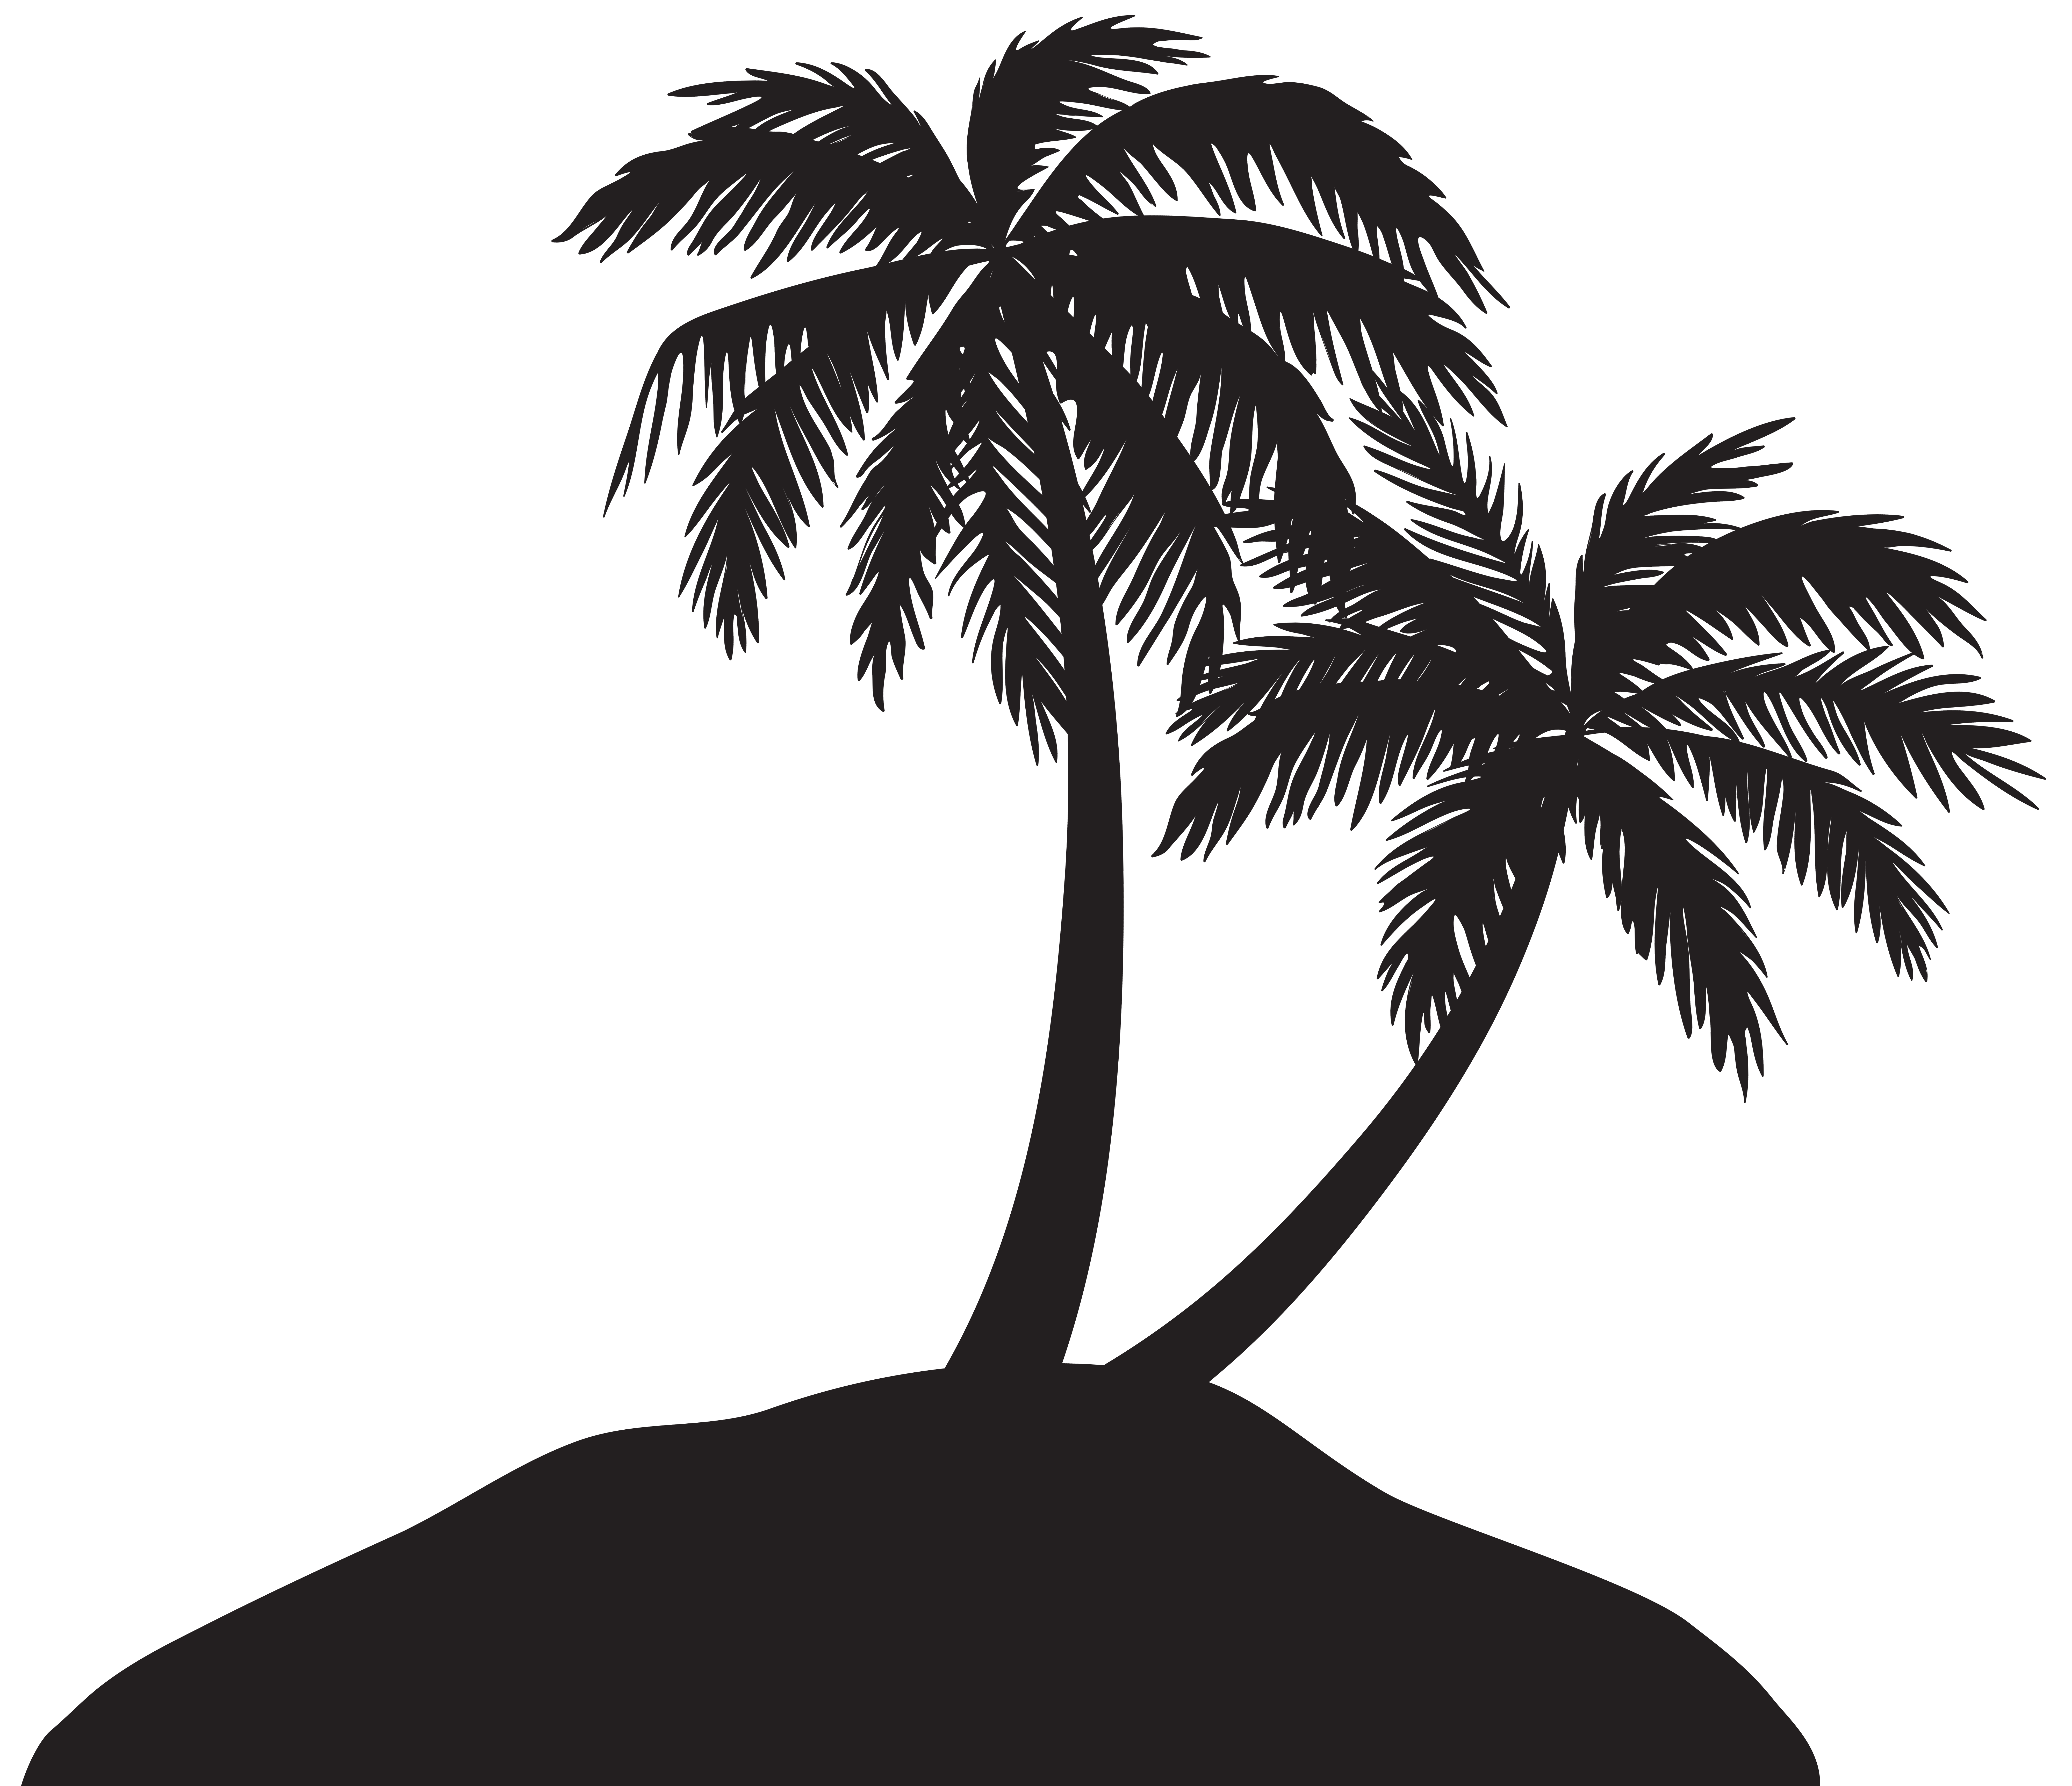 Island clipart rock. With palm trees silhouette